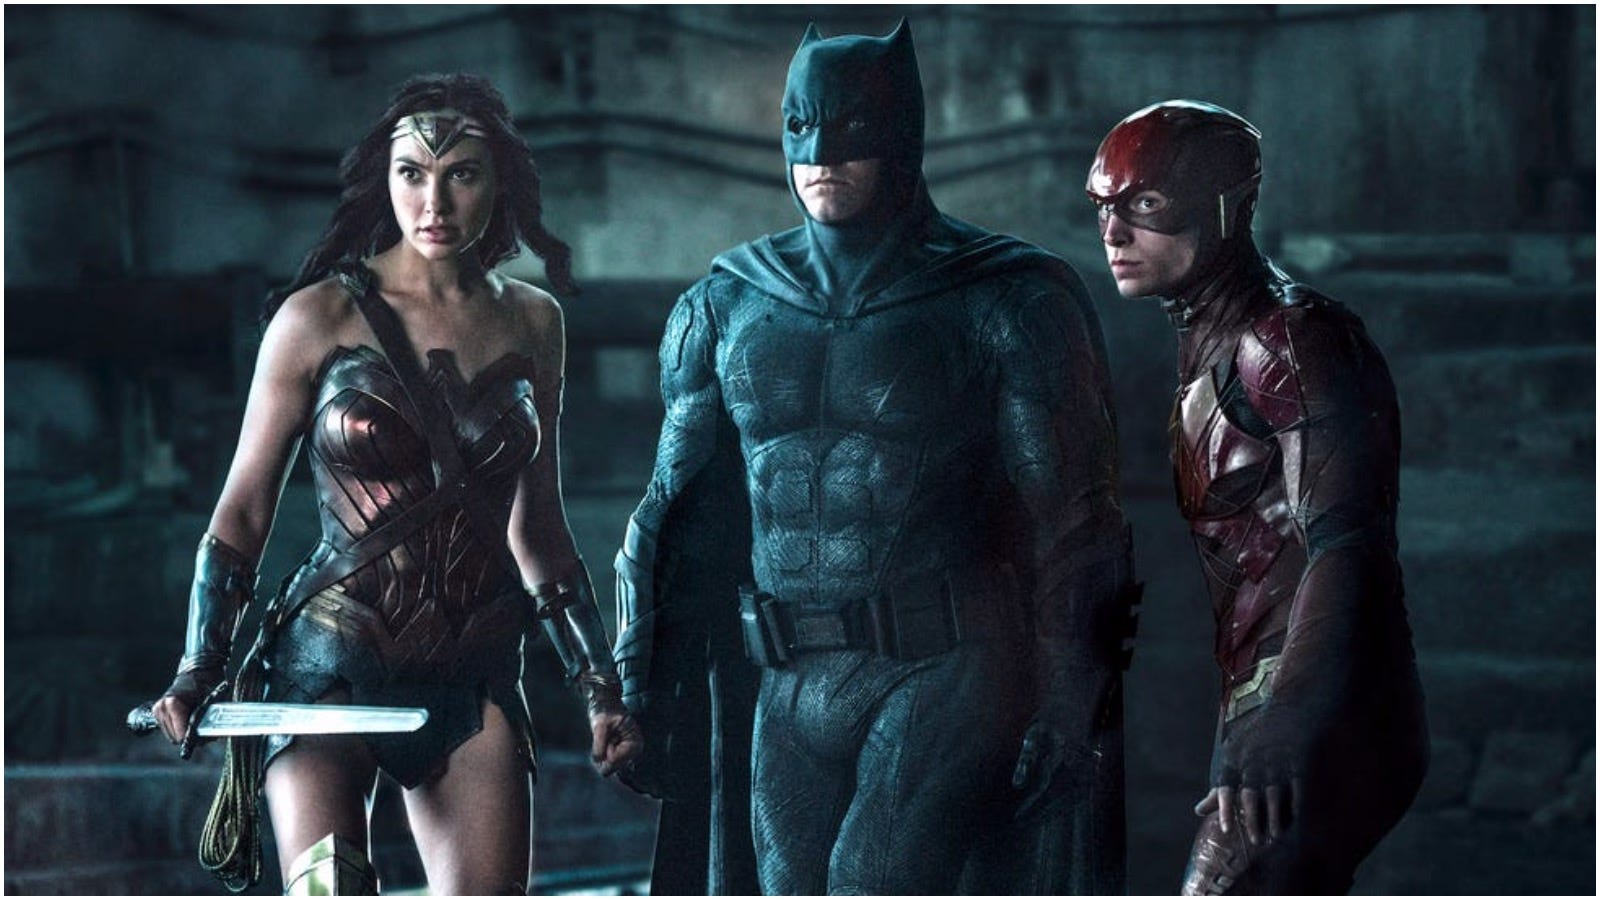 Fans react to Zack Snyder releasing Snyder Cut of 'Justice League'